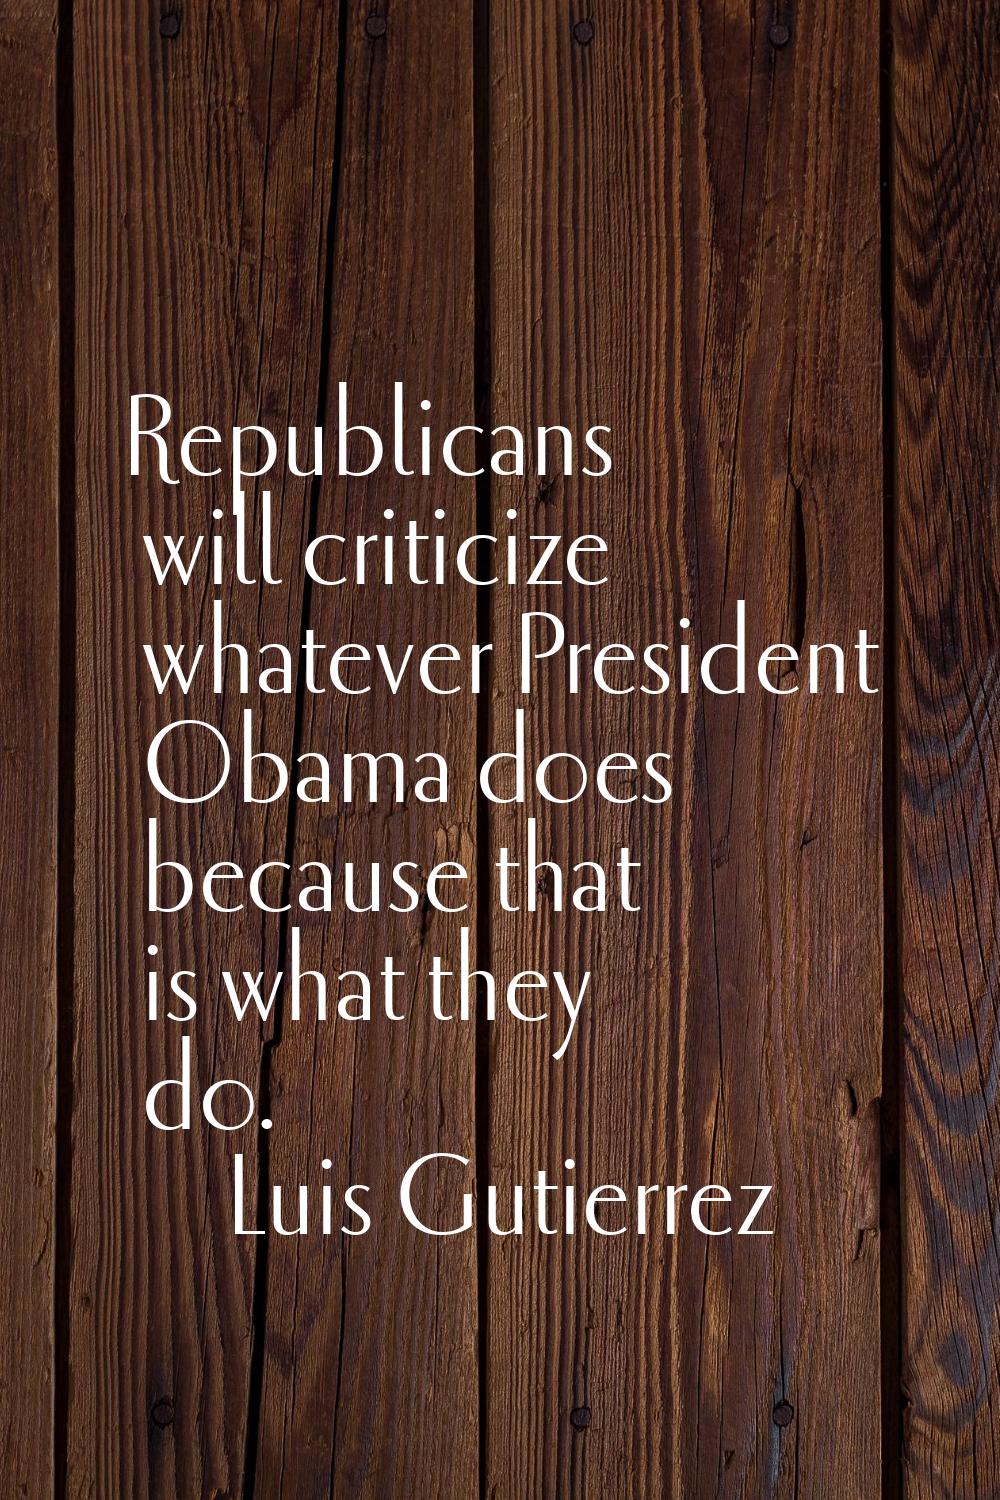 Republicans will criticize whatever President Obama does because that is what they do.